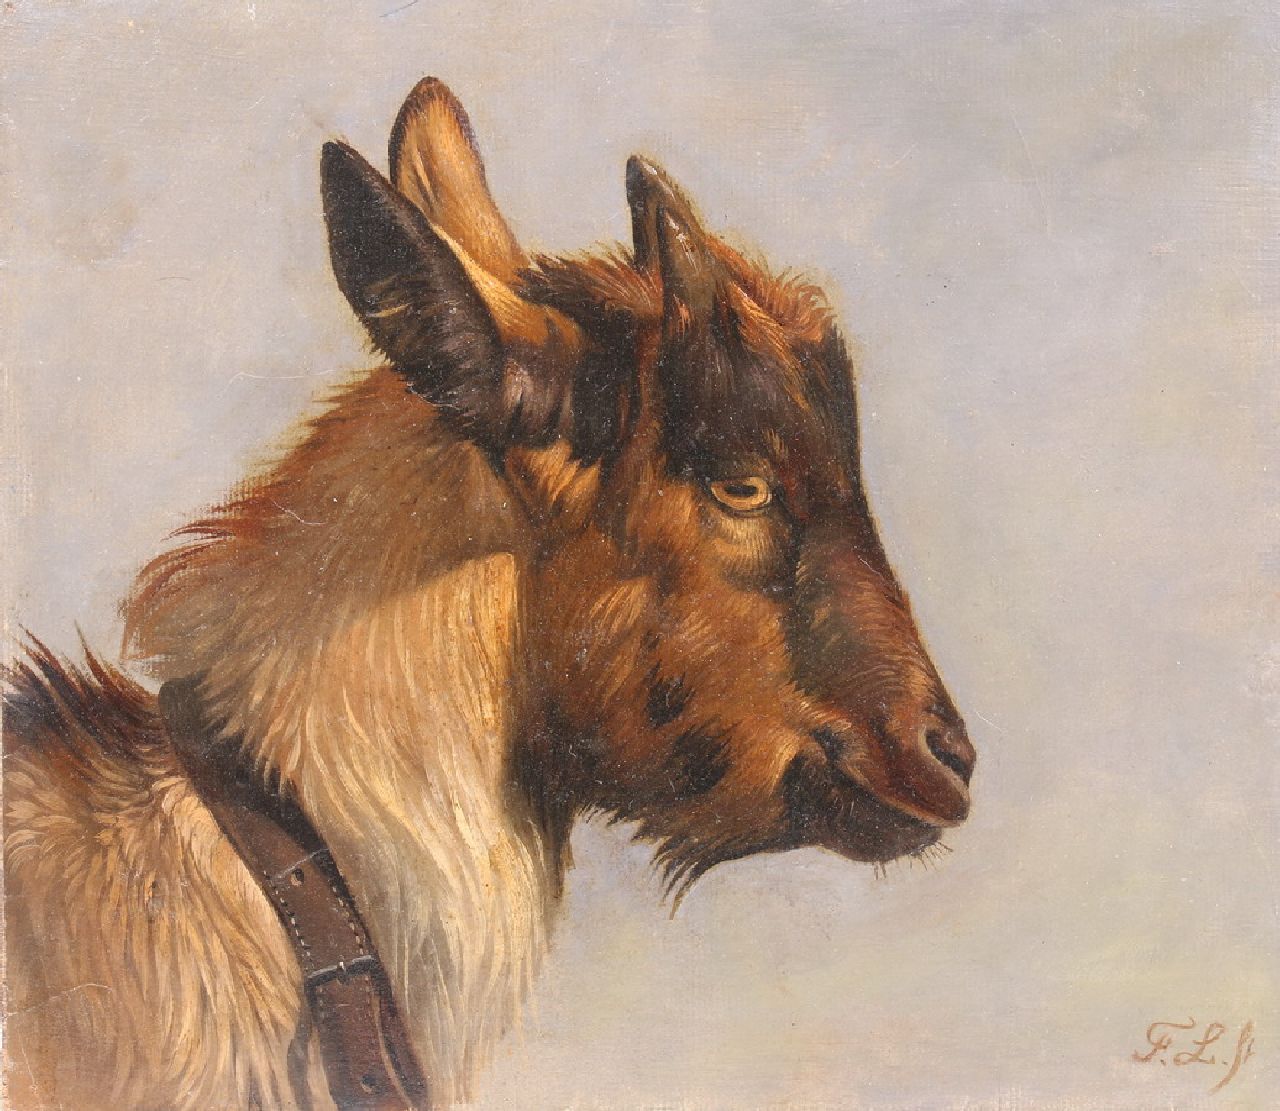 Lebret F.  | Frans Lebret | Paintings offered for sale | Head of a young goat, oil on paper laid down on panel 24.5 x 28.1 cm, signed l.r. with initials